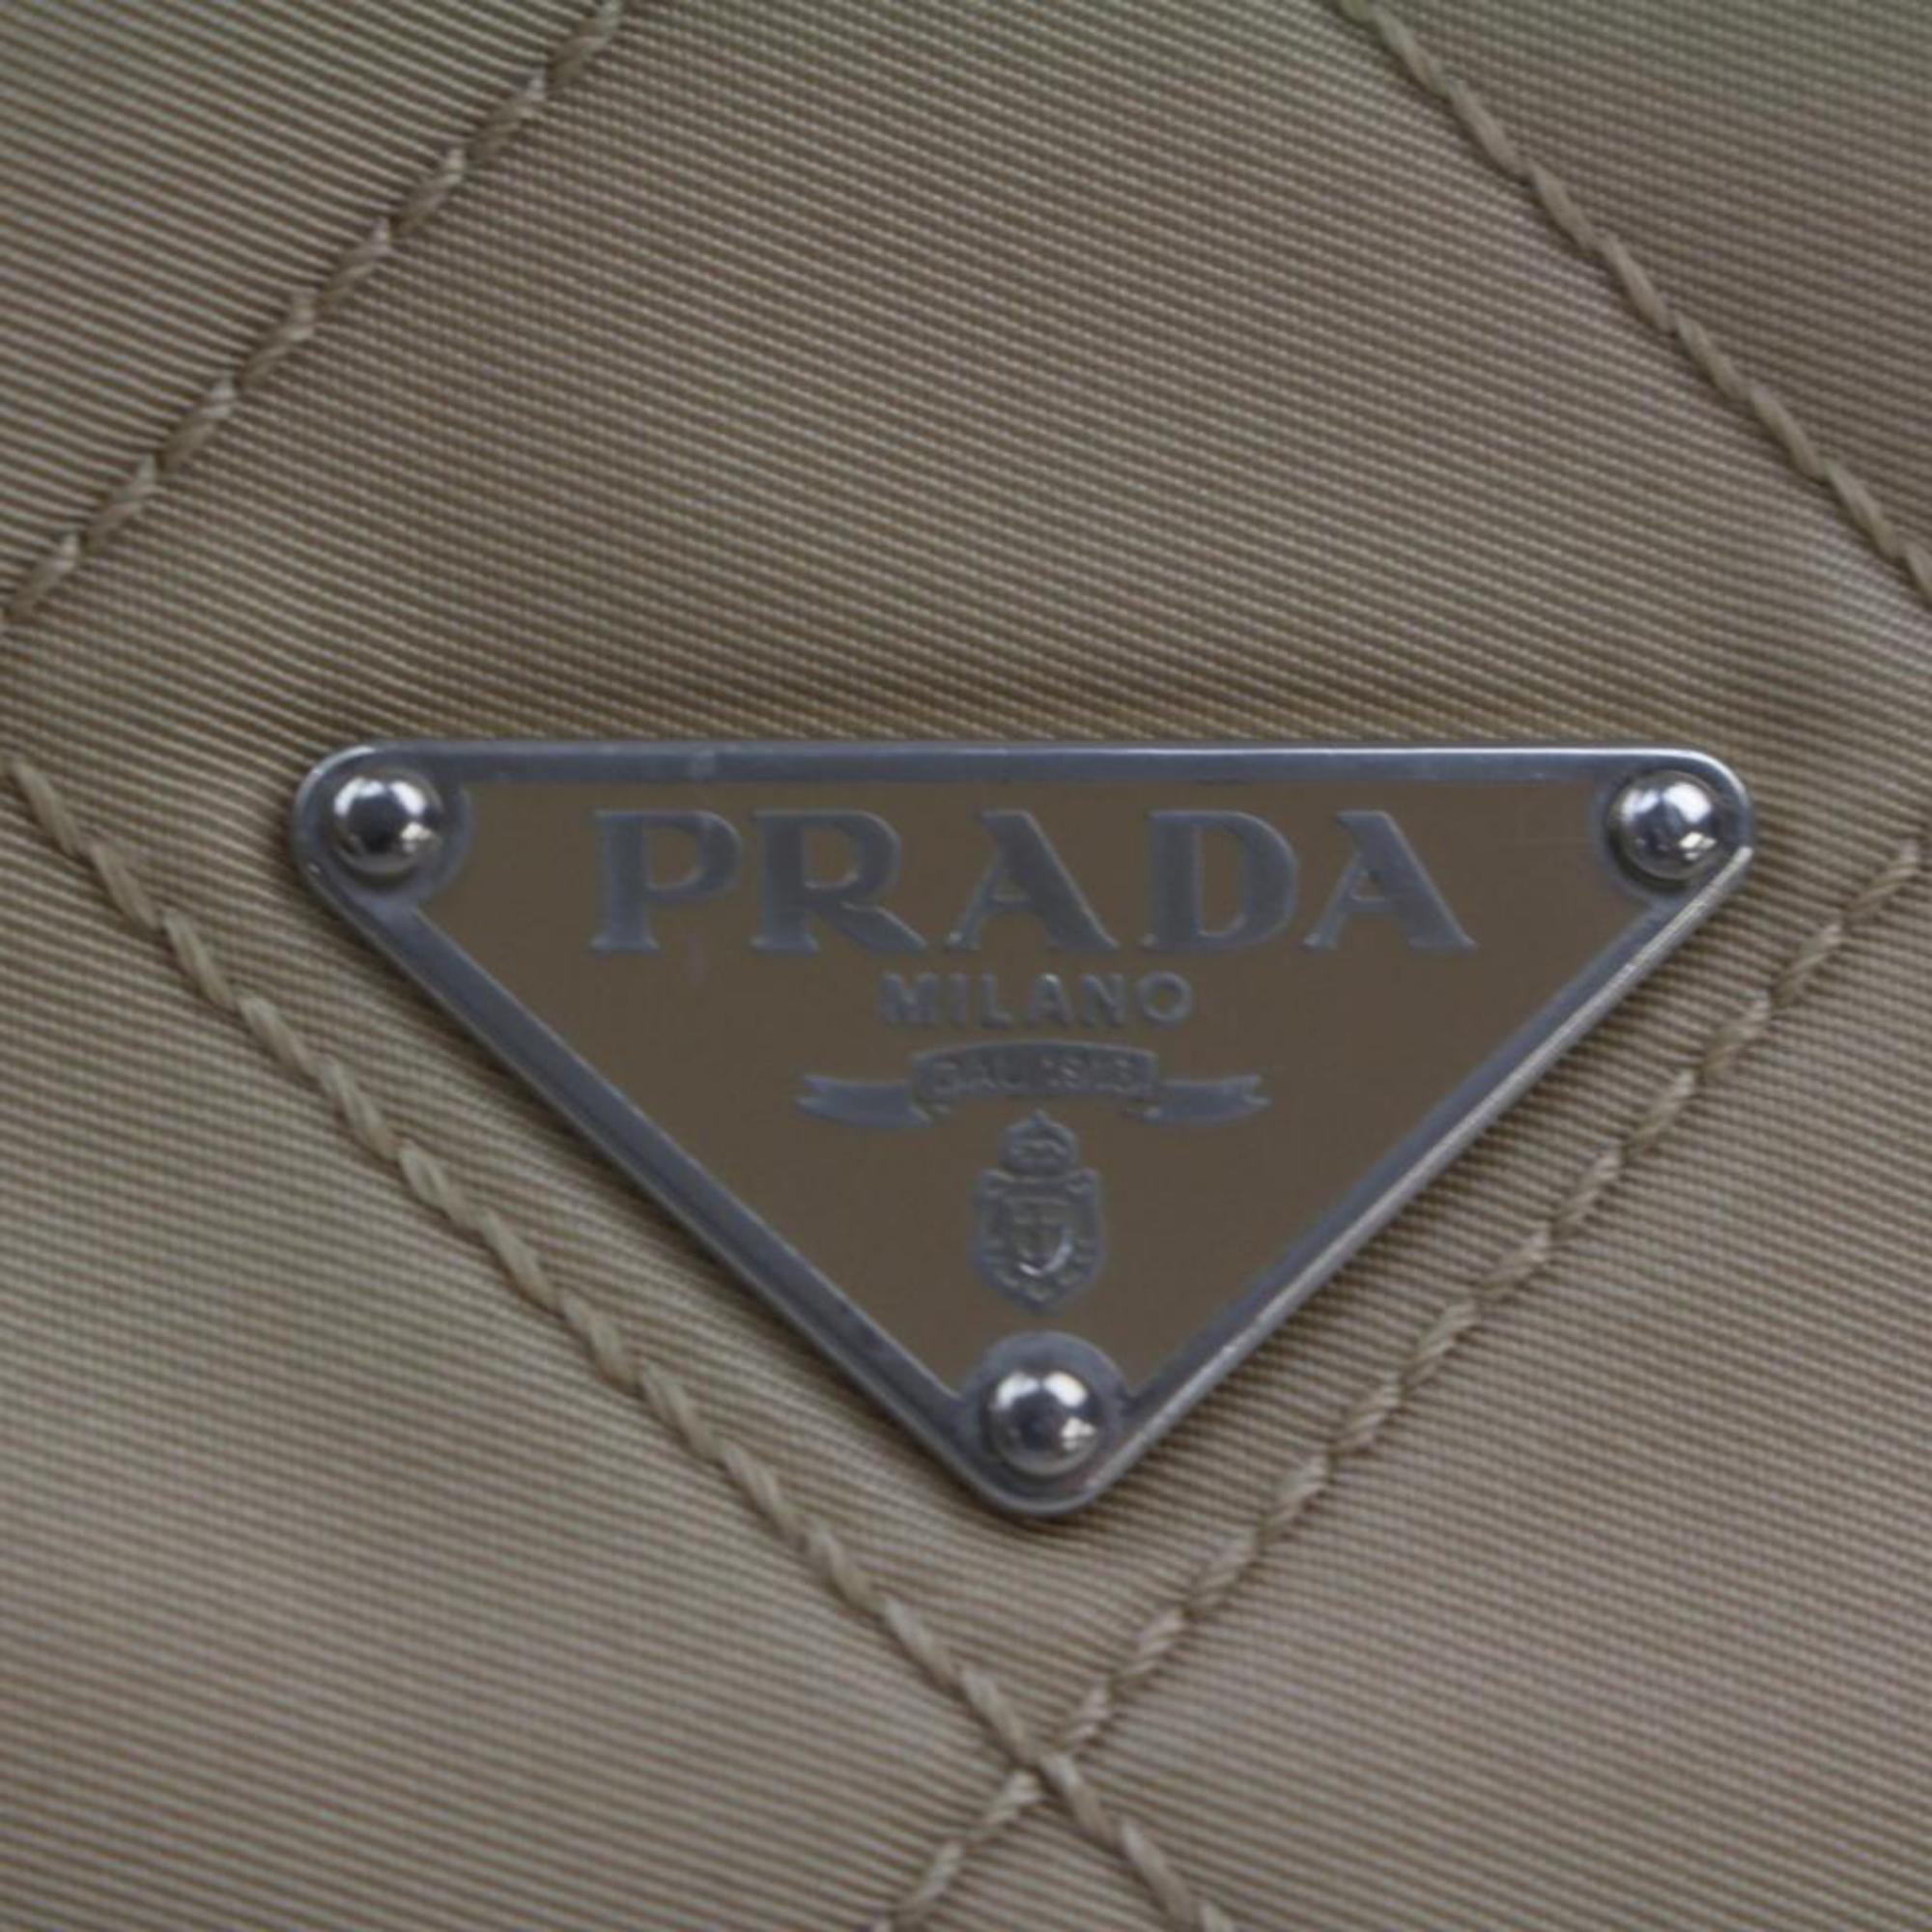 Prada Quilted Tessuto Messenger 868455 Beige Nylon Cross Body Bag In Good Condition For Sale In Forest Hills, NY